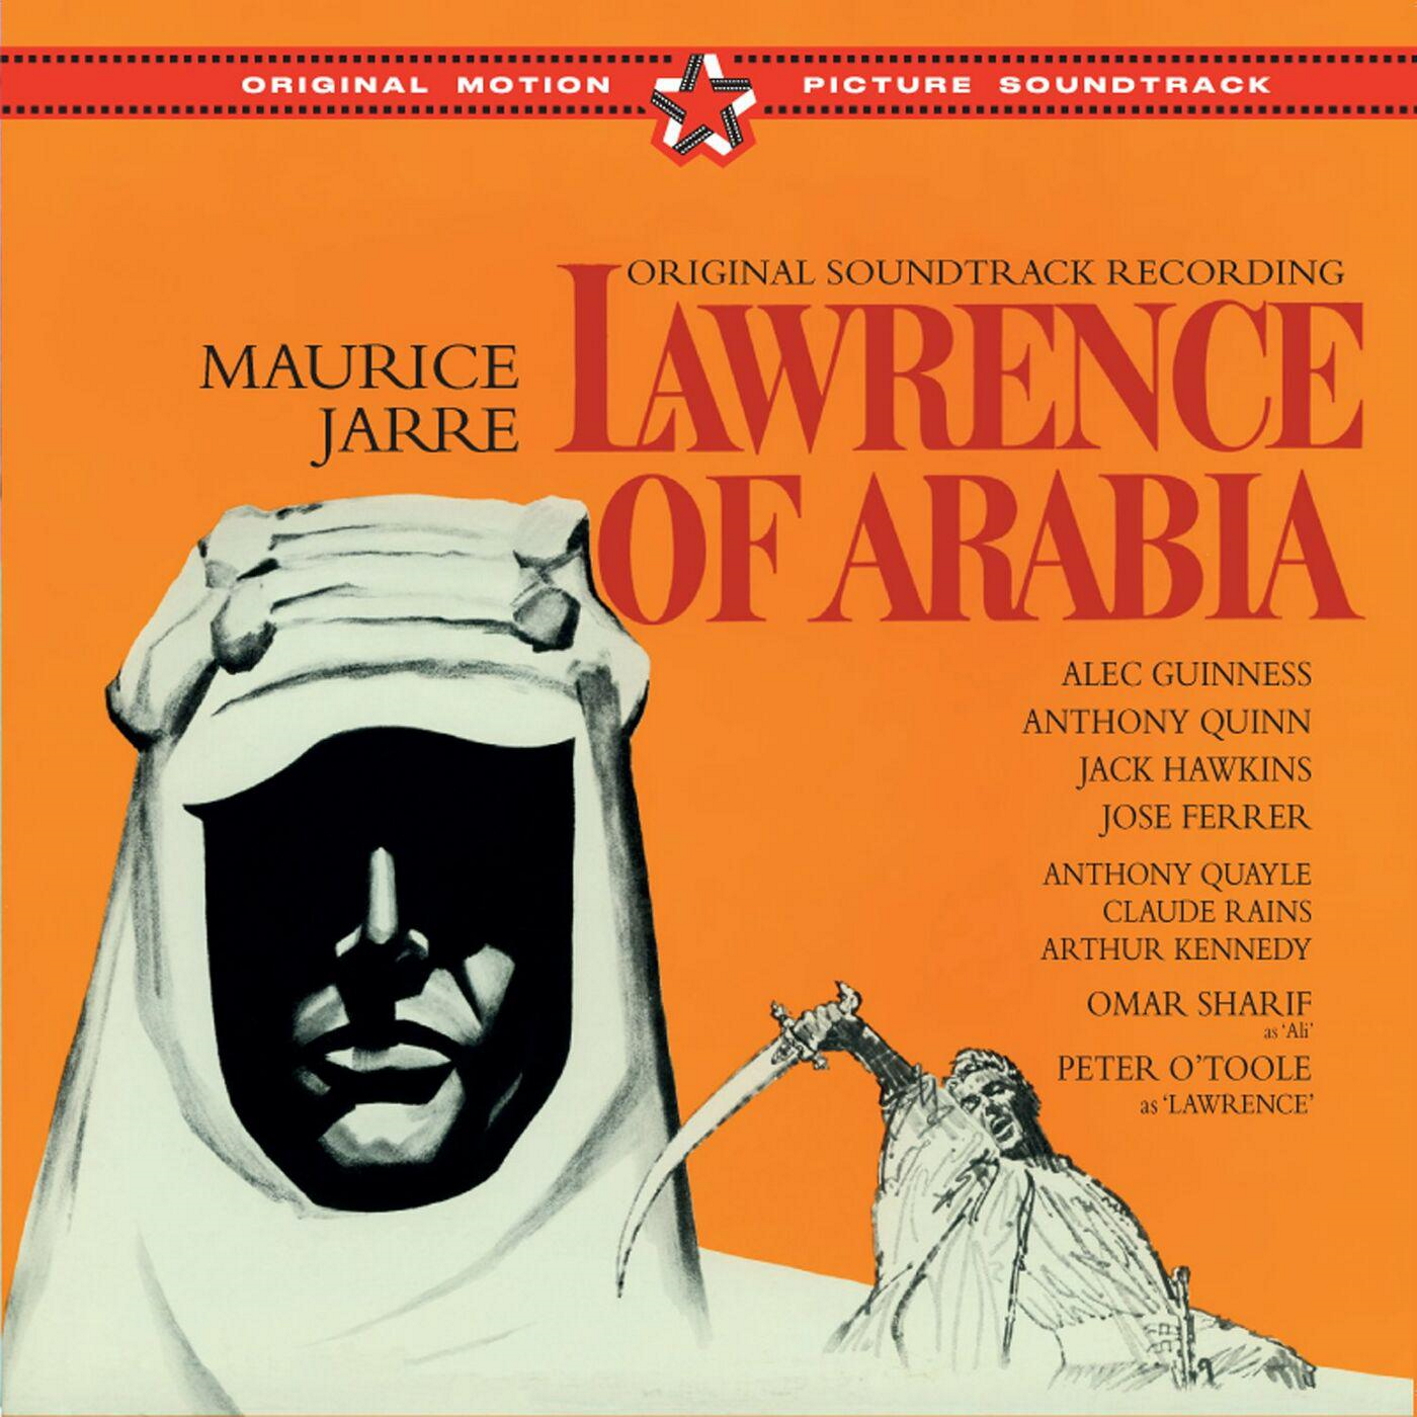 Lawrence of Arabia (Newly Restored Edition)